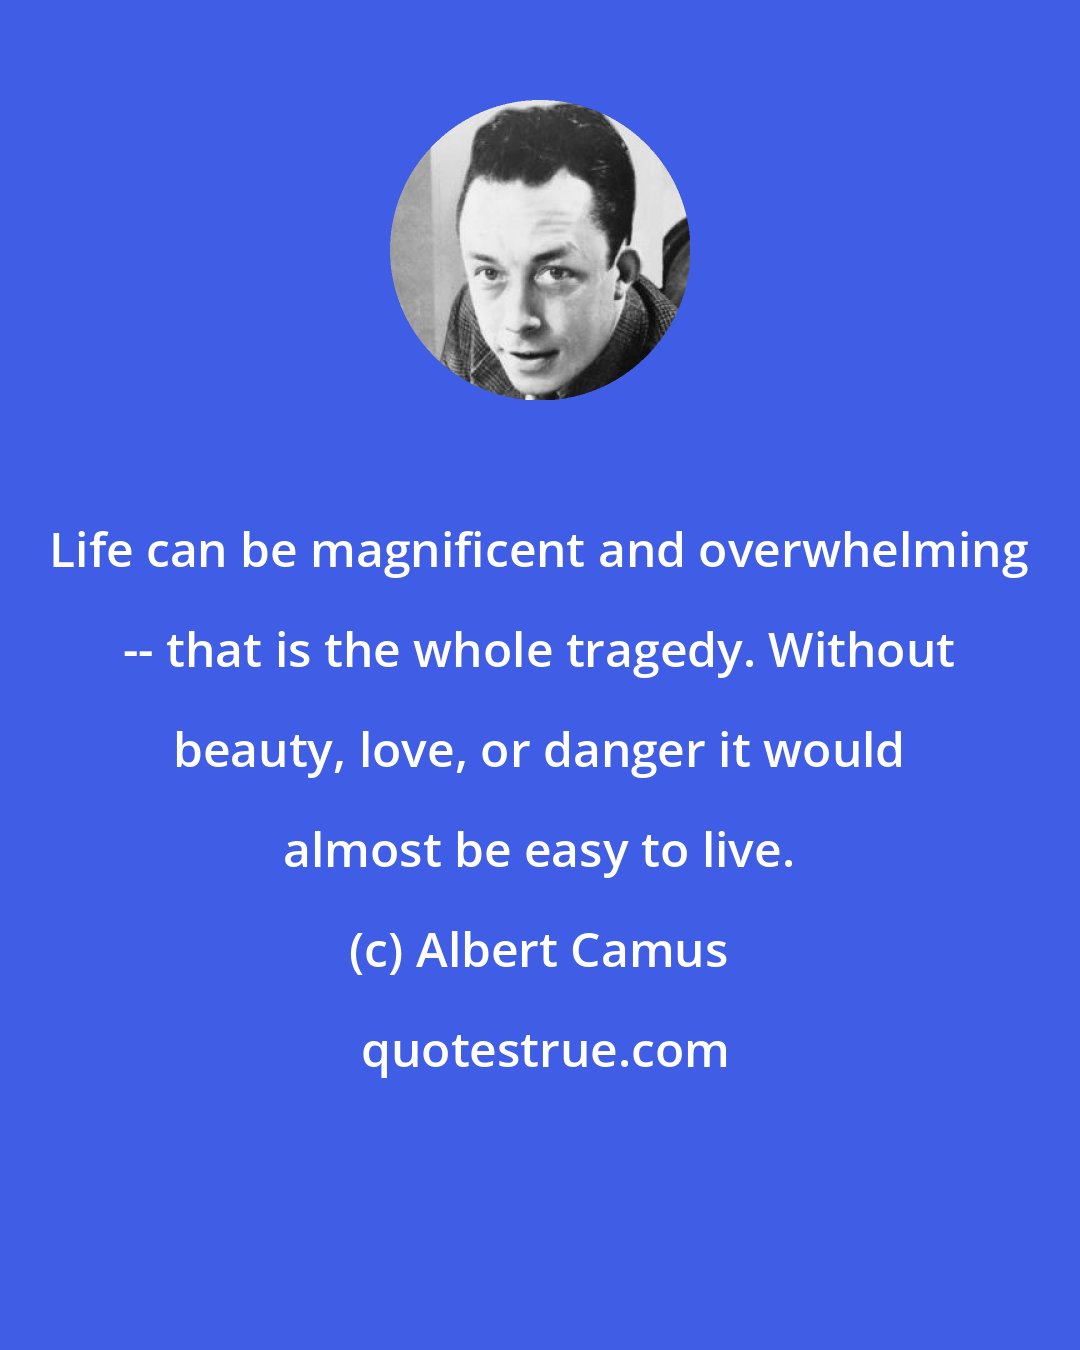 Albert Camus: Life can be magnificent and overwhelming -- that is the whole tragedy. Without beauty, love, or danger it would almost be easy to live.